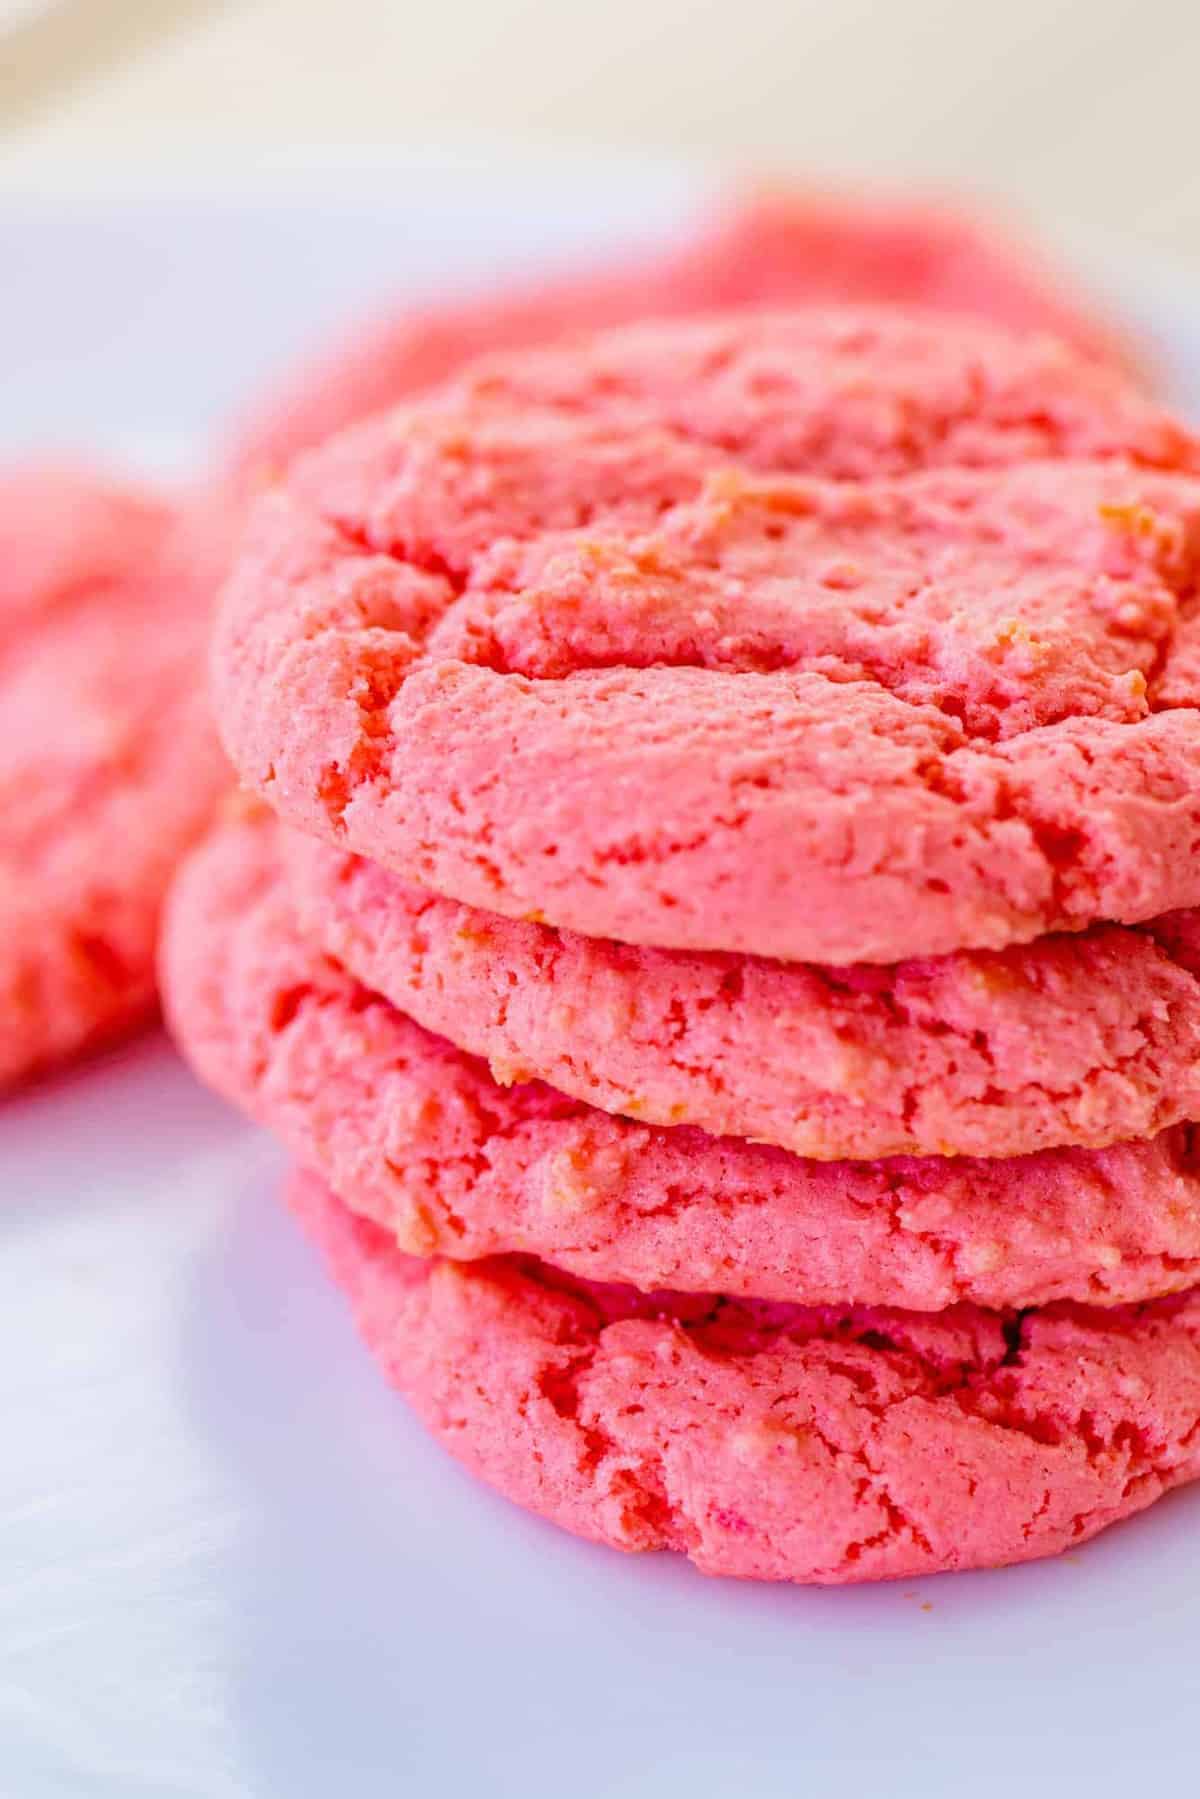 Strawberry Lemonade Cookies are stacked on a plate after being baked.